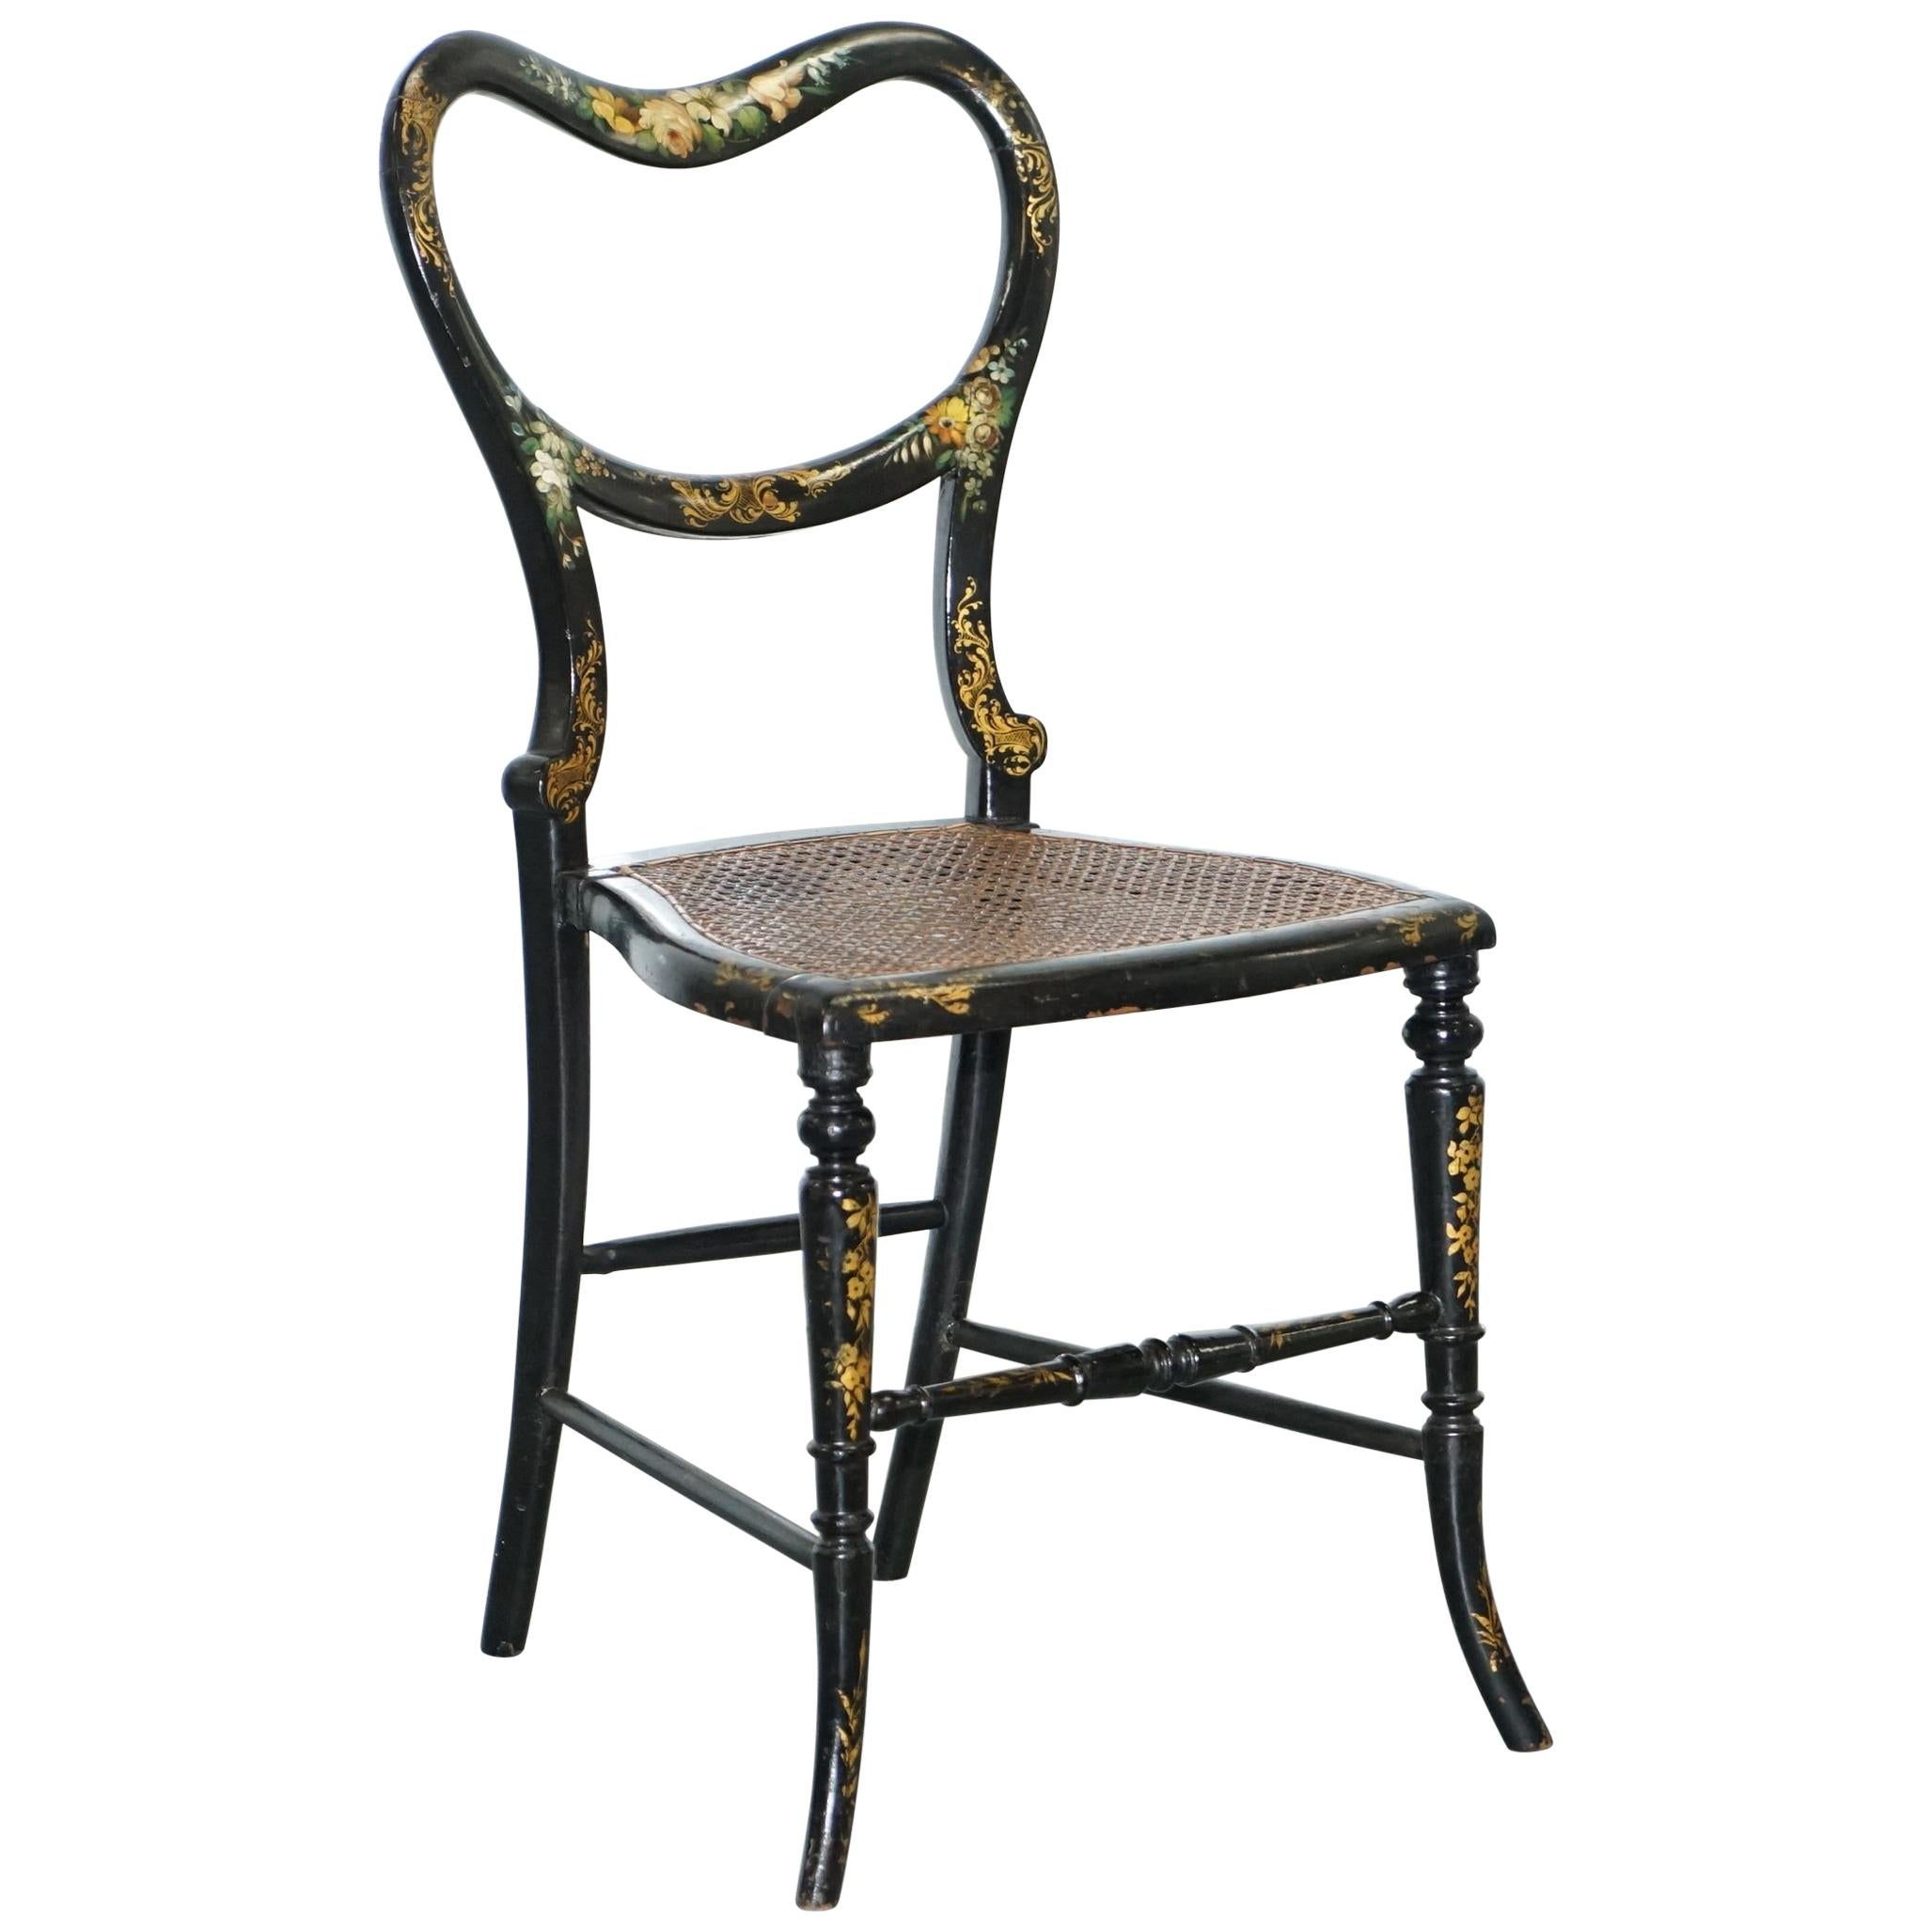 18th Century Georgian Rare Floral Hand Painted Chinoiserie Ebonised Chair